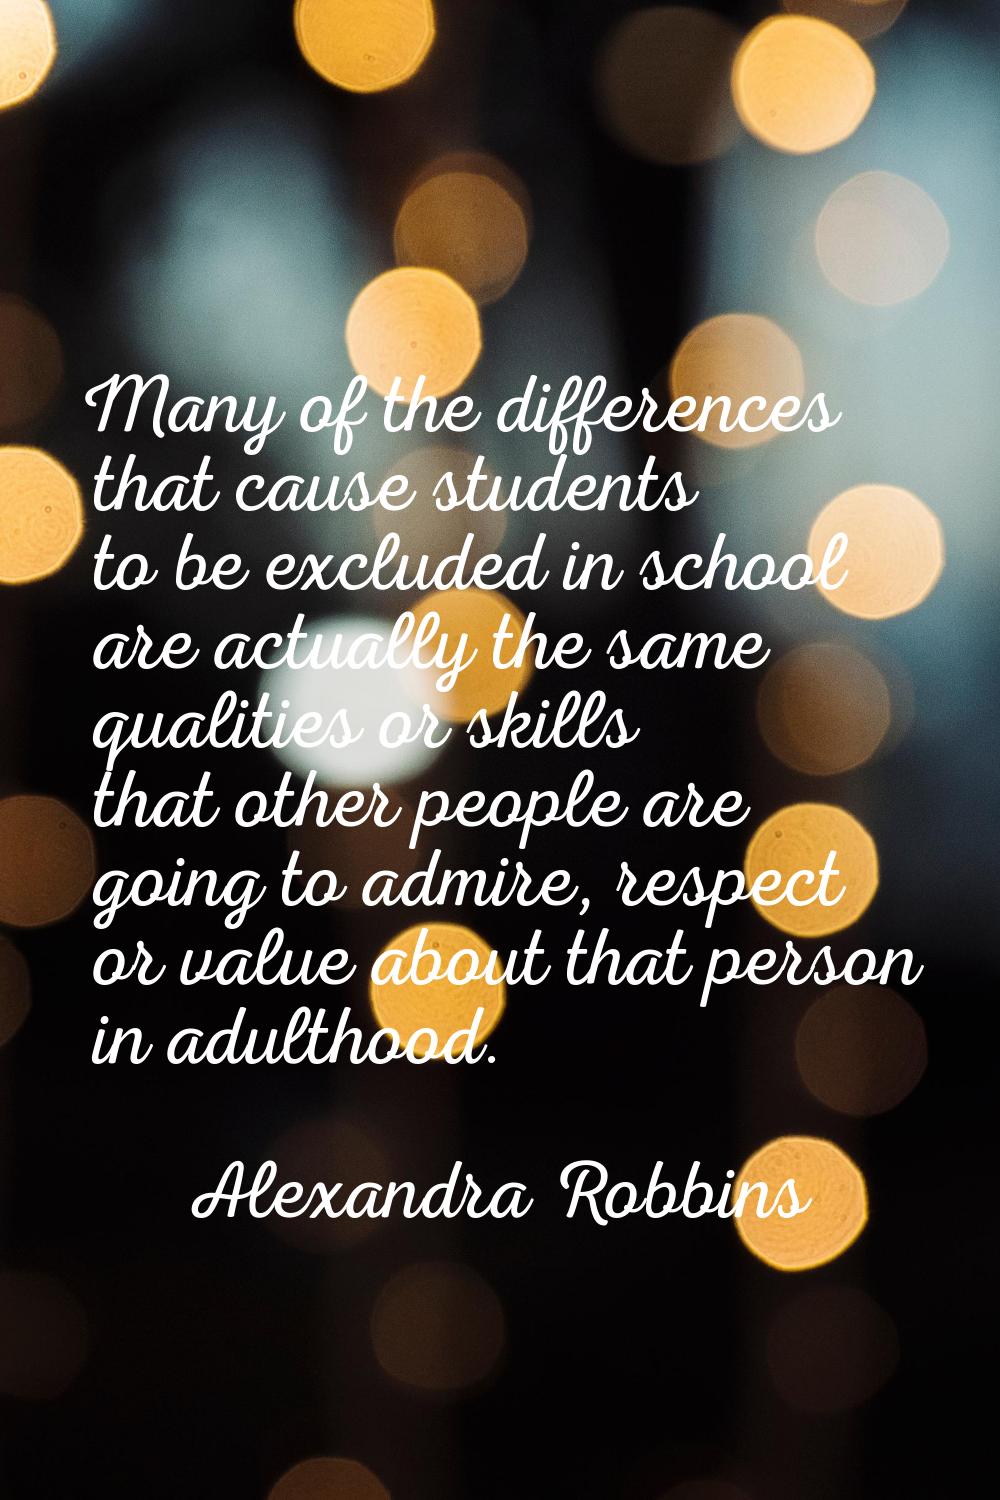 Many of the differences that cause students to be excluded in school are actually the same qualitie